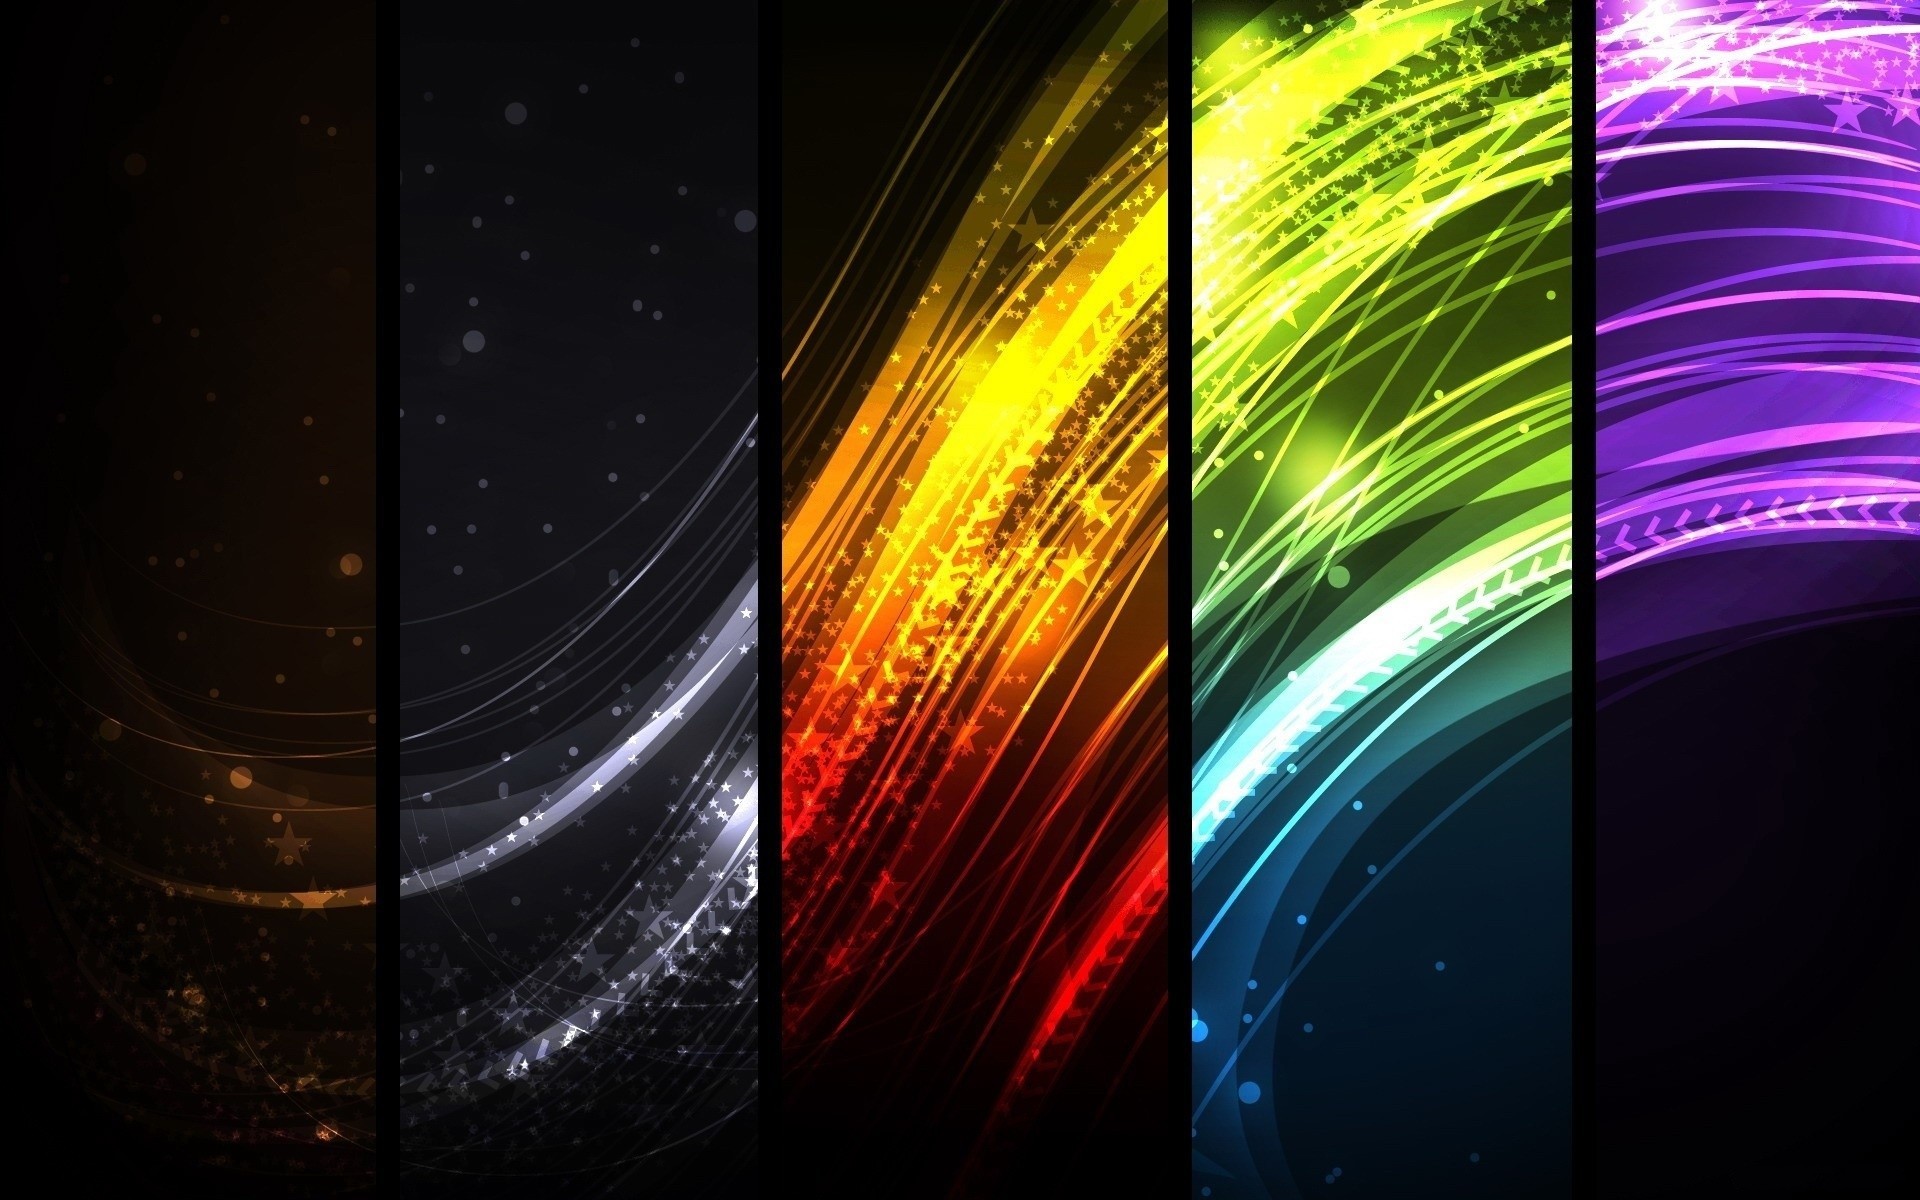 Multi Colors Wallpapers Find best latest Multi Colors Wallpapers in HD for your PC desktop